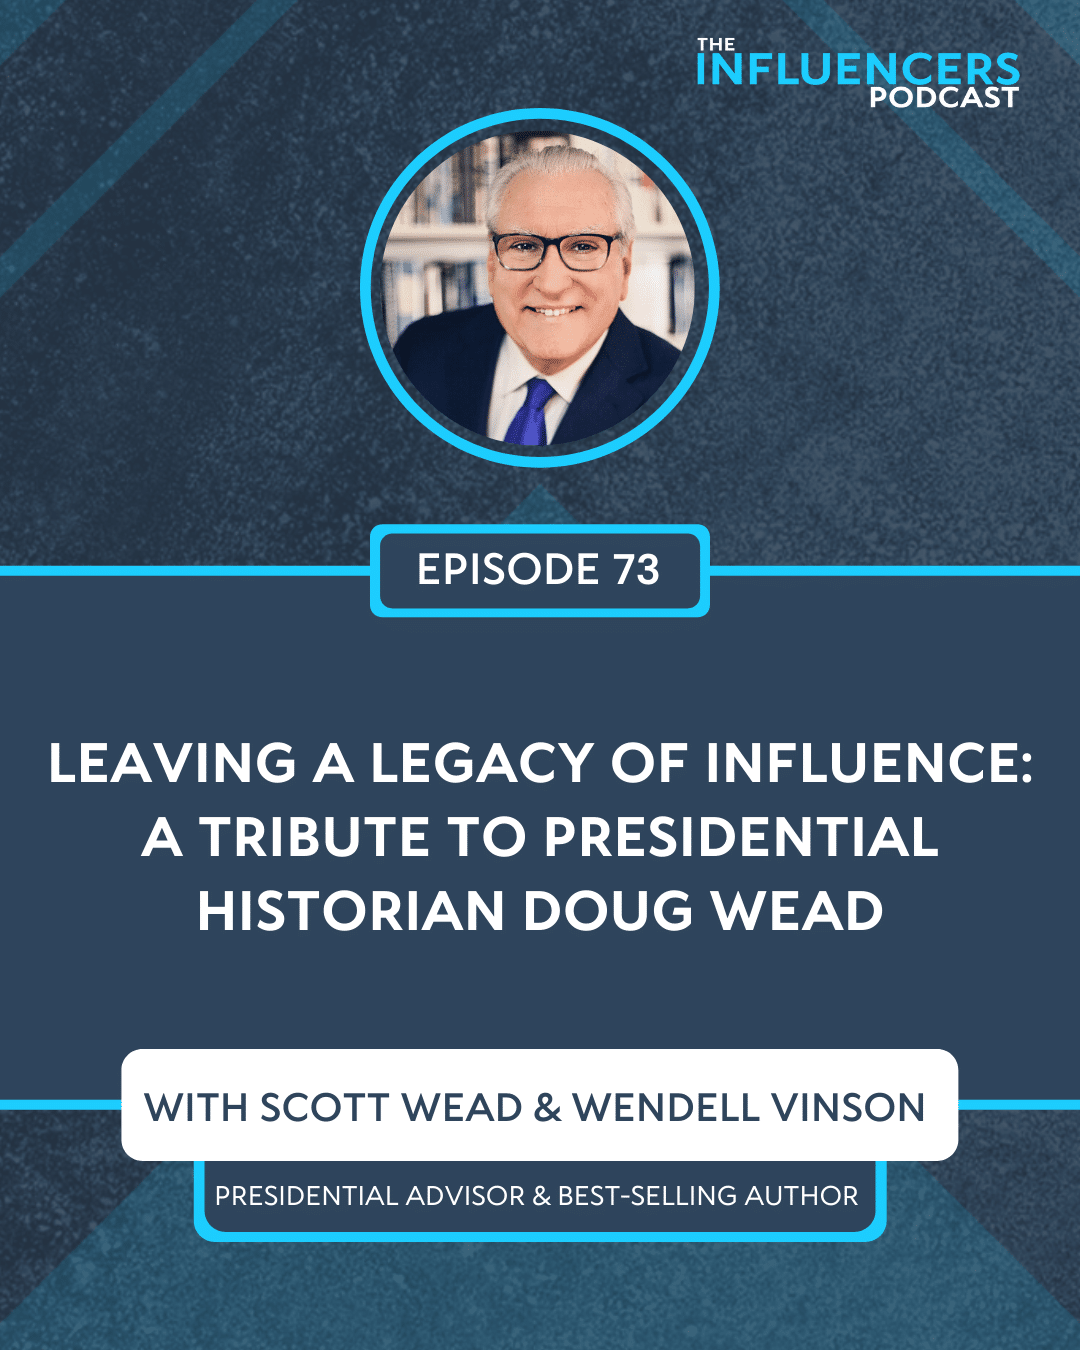 Episode 73 with Scott Wead and Wendell Vinson.